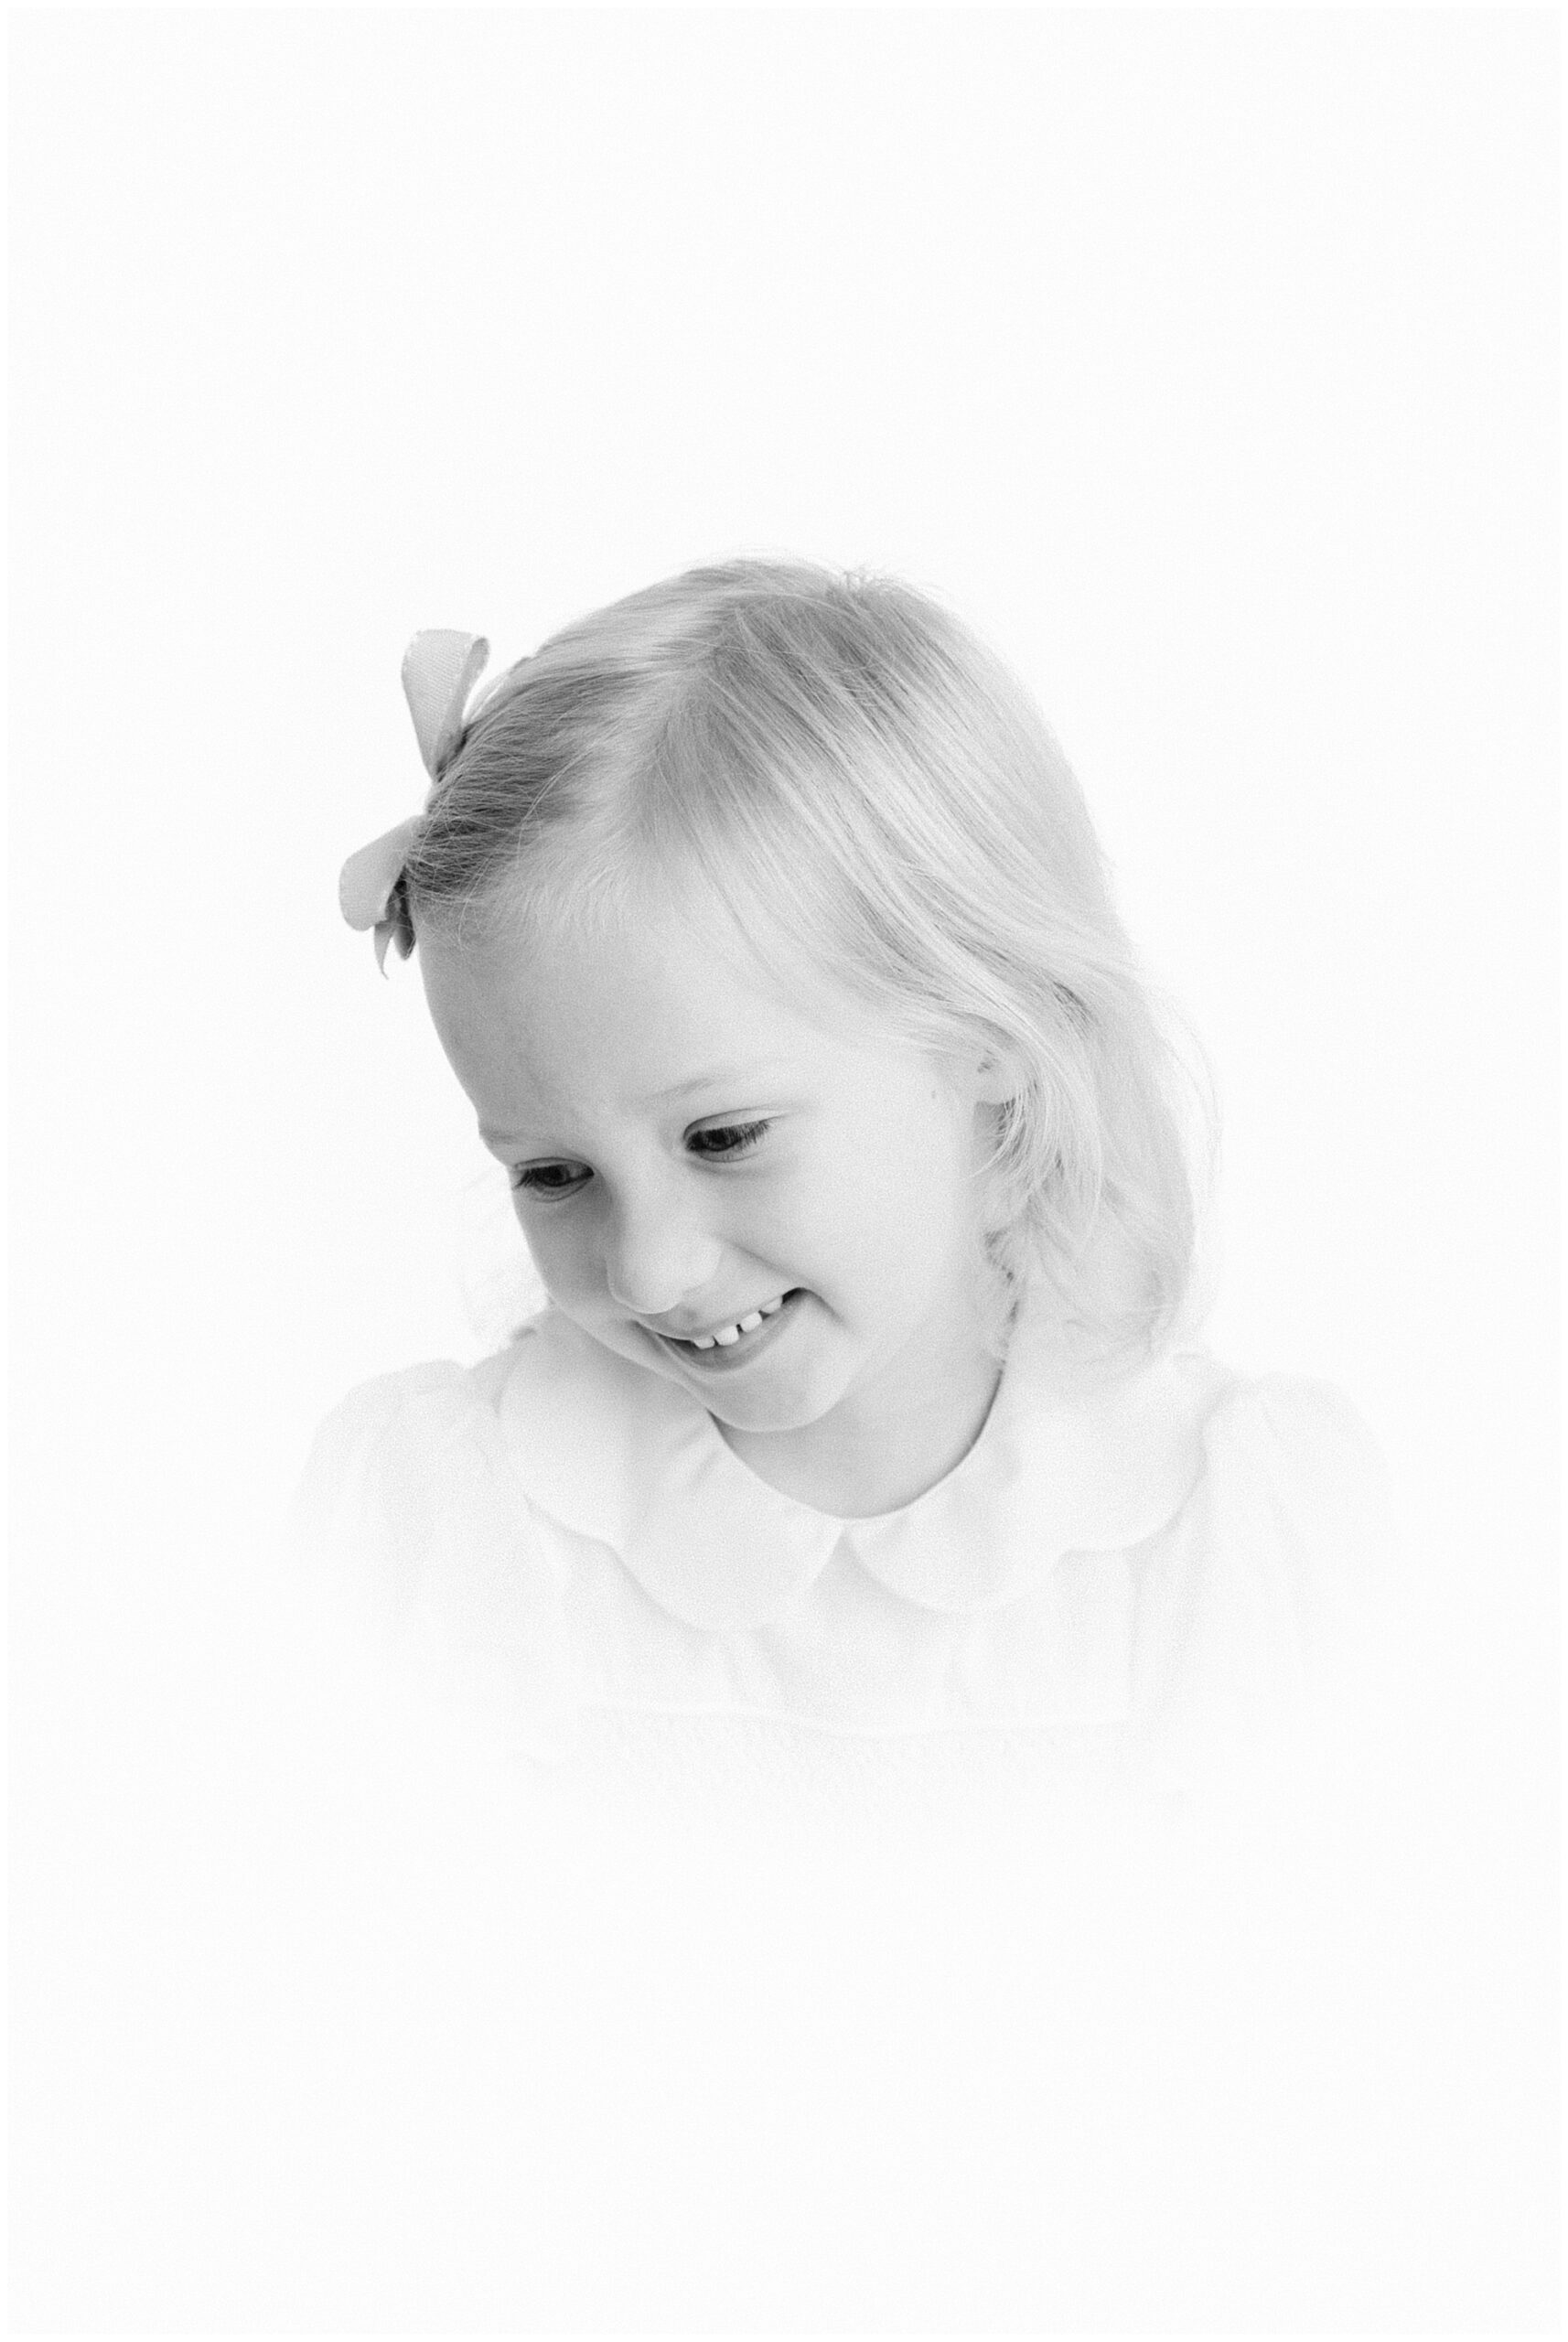 Black and white heirloom photo of a young girl smiling down.